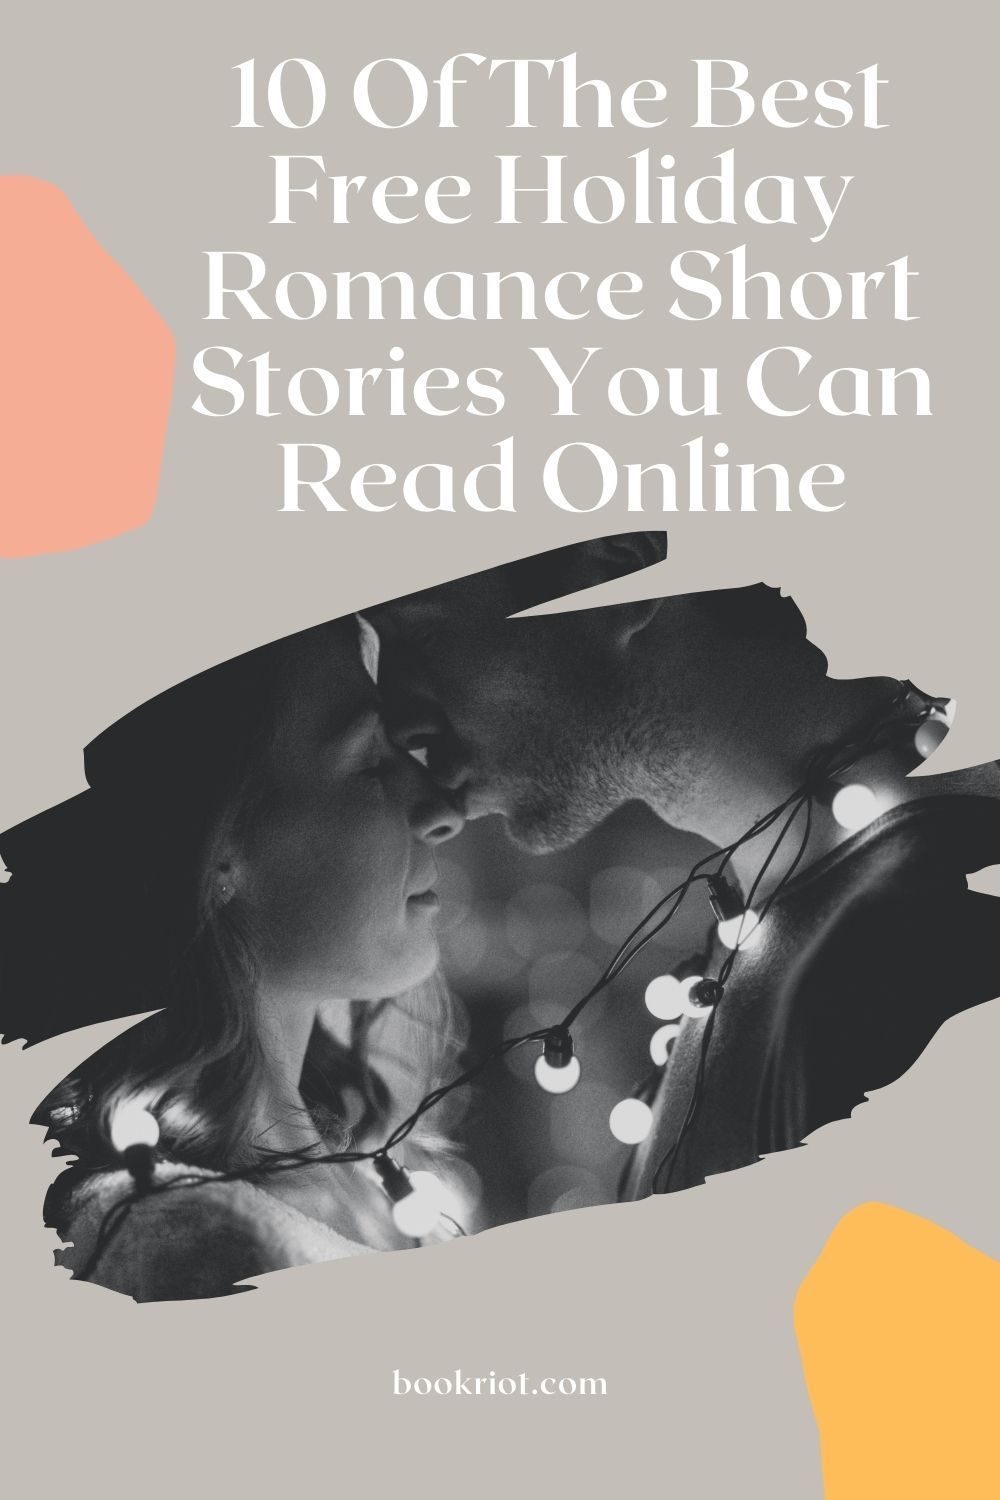 10 Of The Best Free Holiday Romance Short Stories You Can Read Online